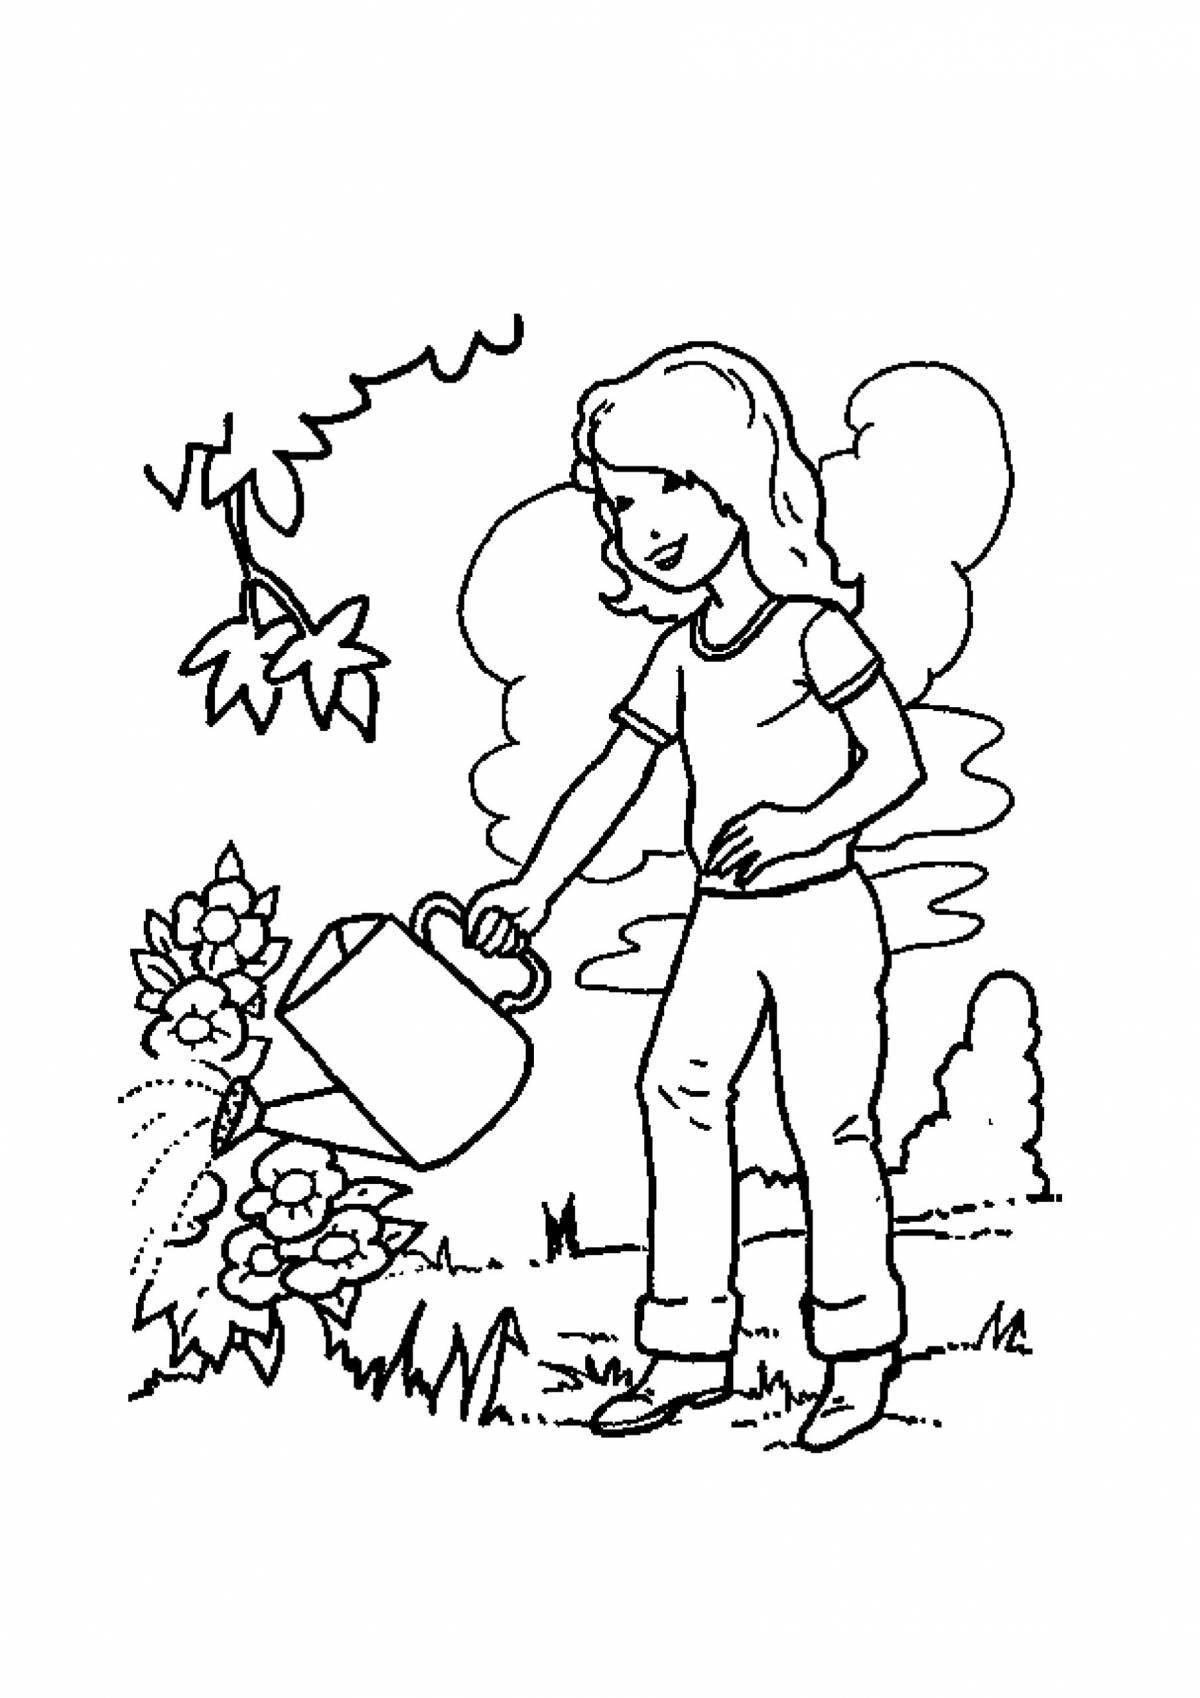 Luminous care for nature coloring page